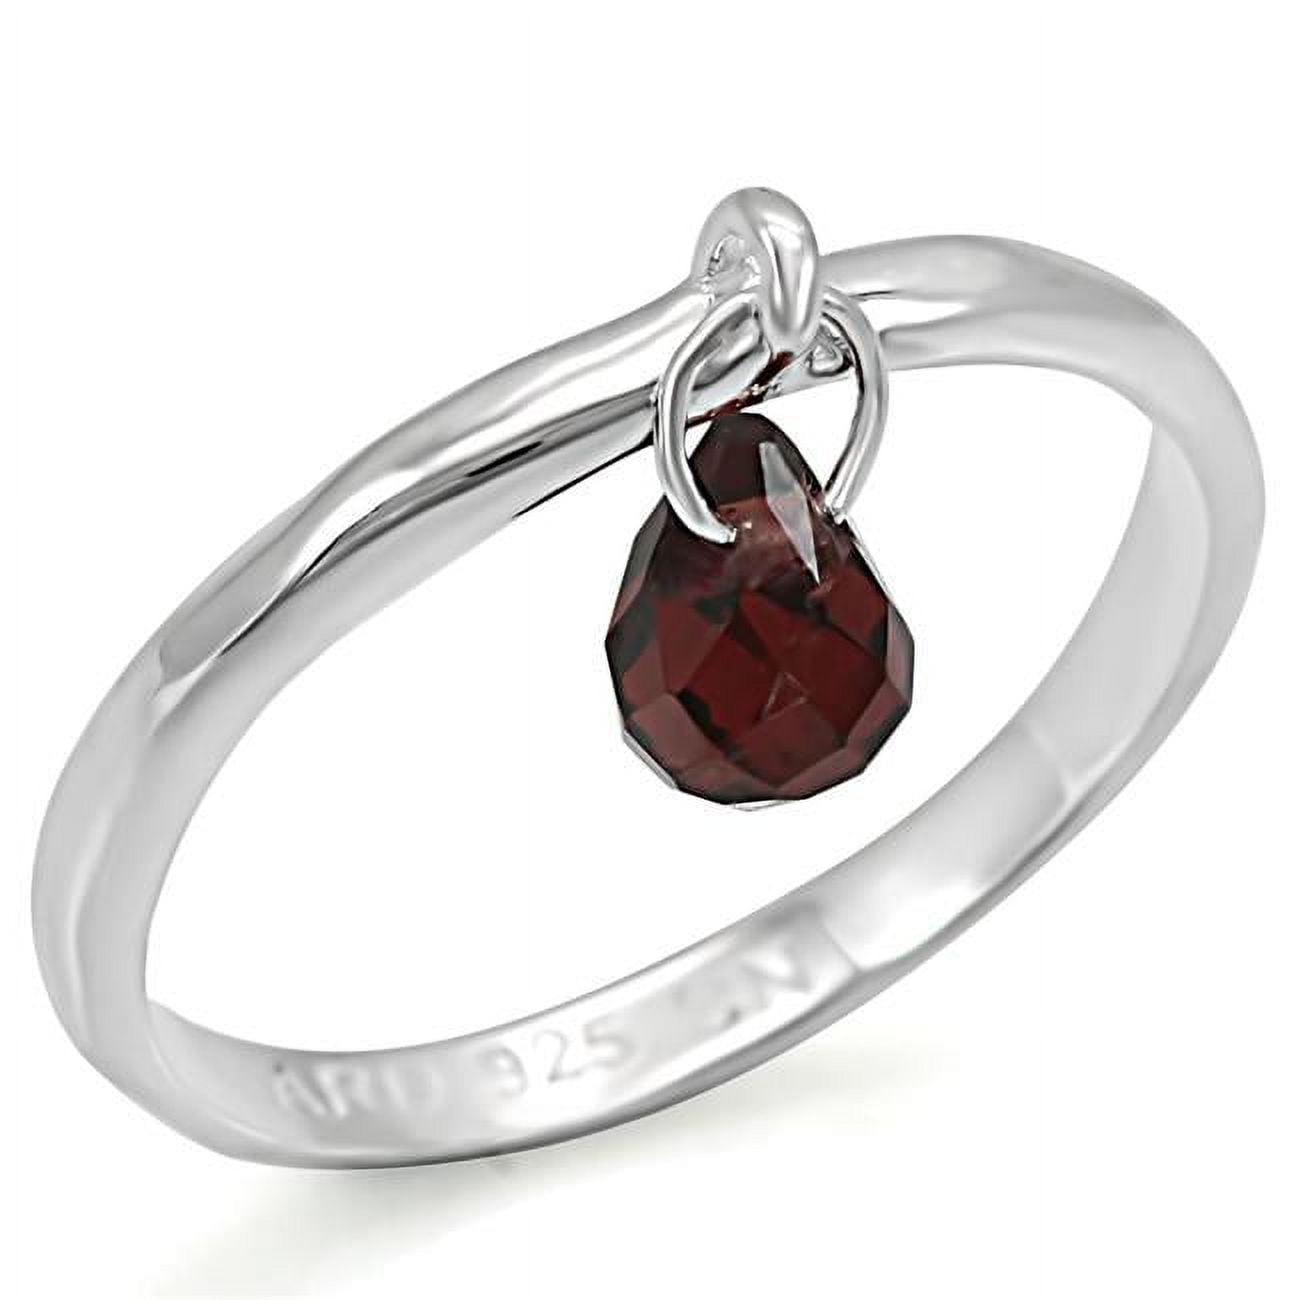 Picture of Alamode LOS320-10 Women Silver 925 Sterling Silver Ring with Genuine Stone in Garnet - Size 10